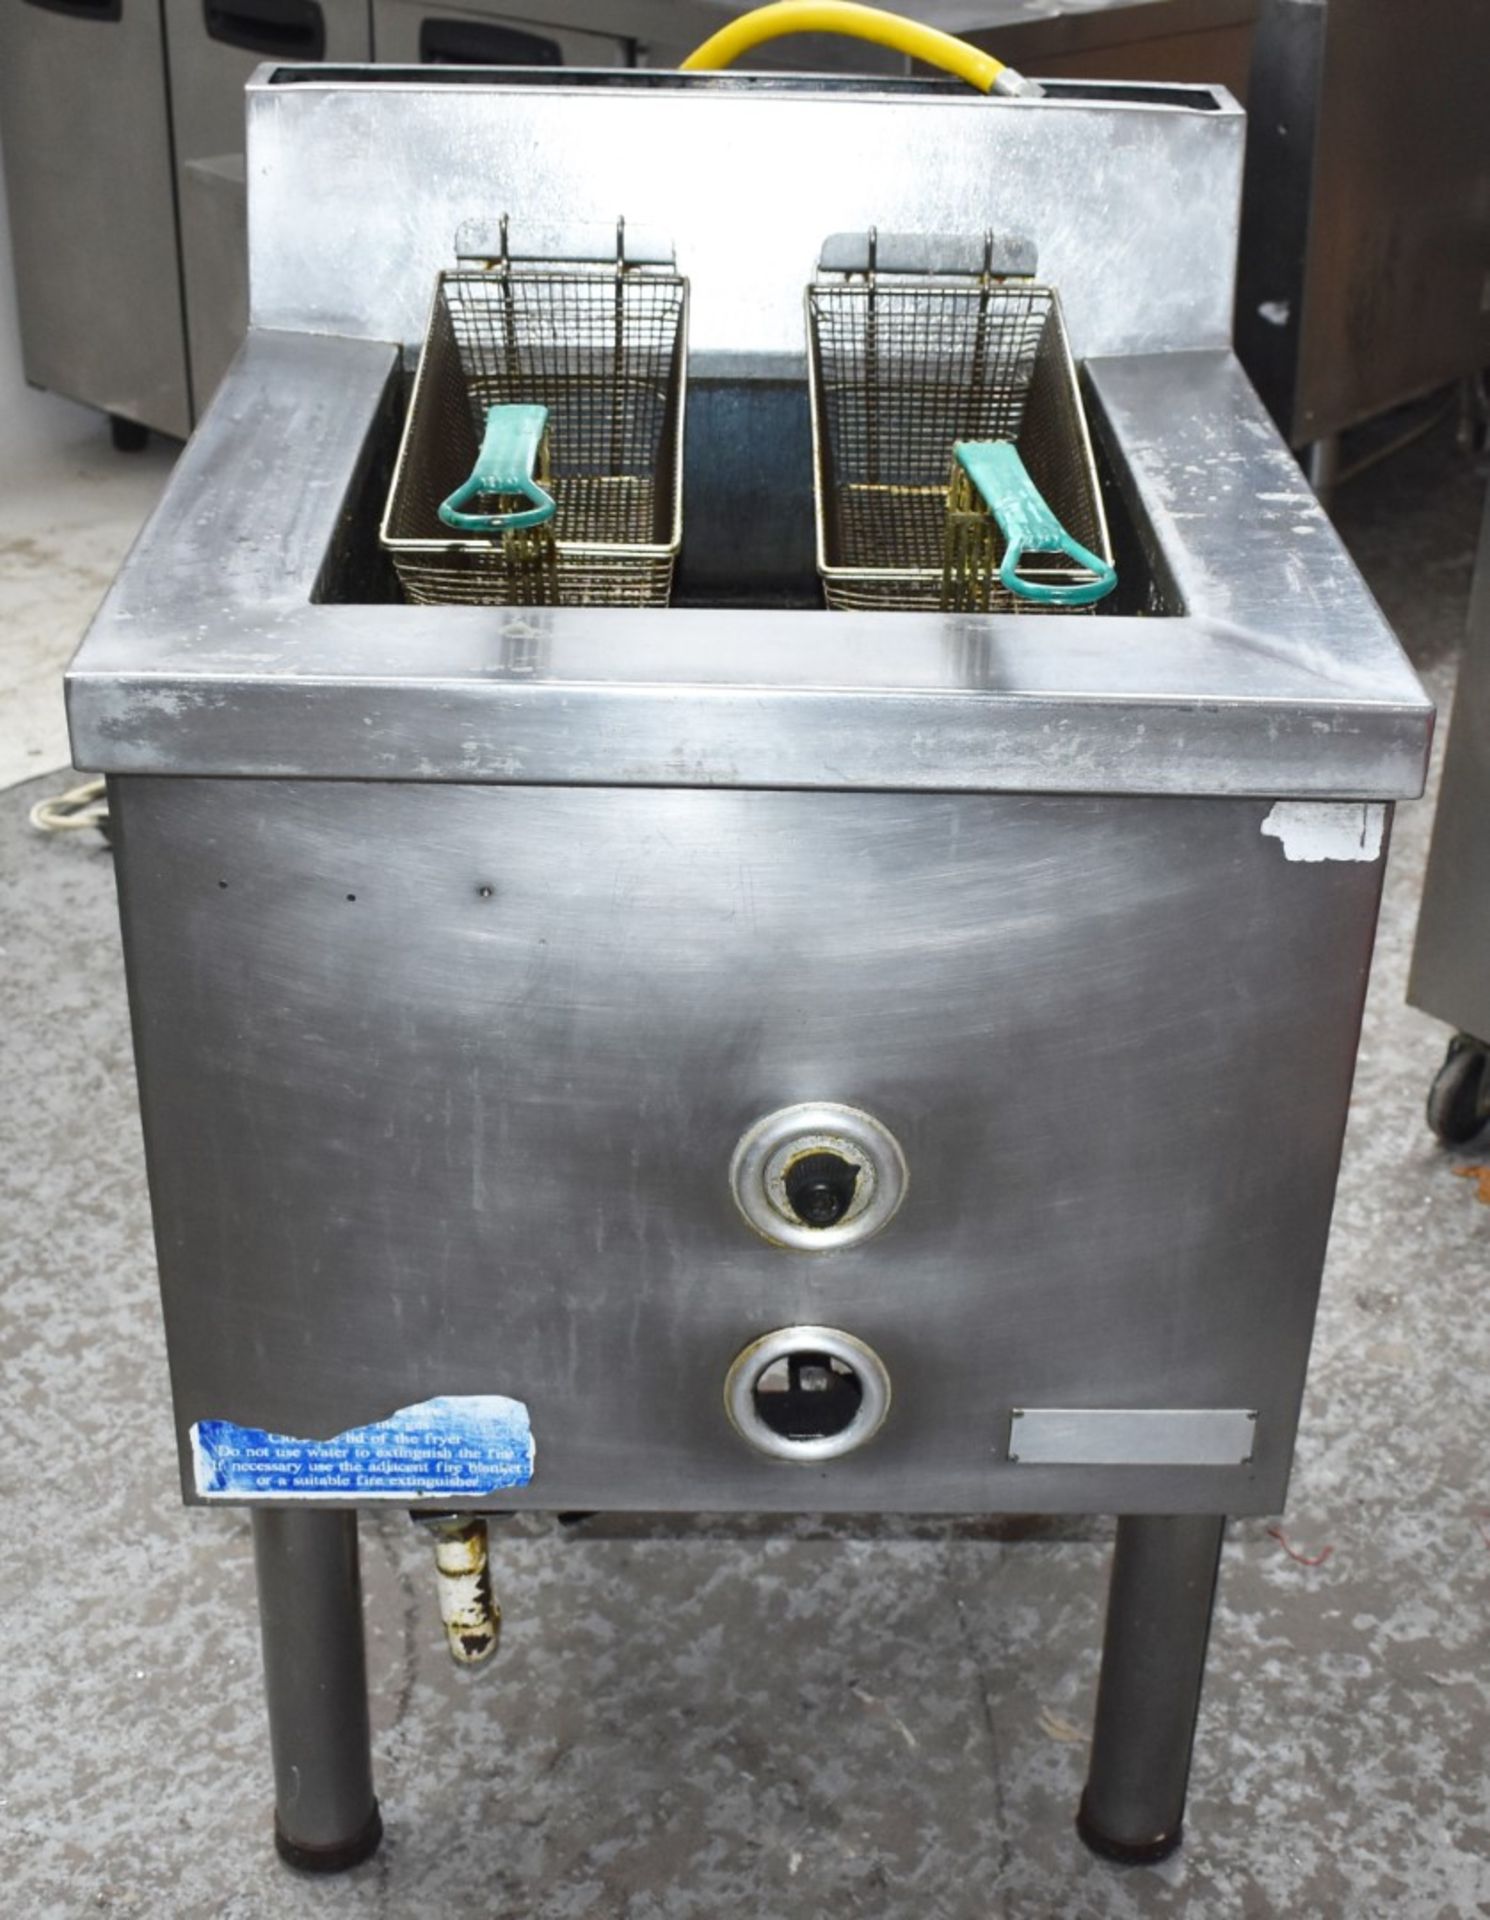 1 x Twin Basket Natural Gas Fryer With Stainless Steel Finish - H89 x W65.5 x D70 cms - CL459 - - Image 3 of 7